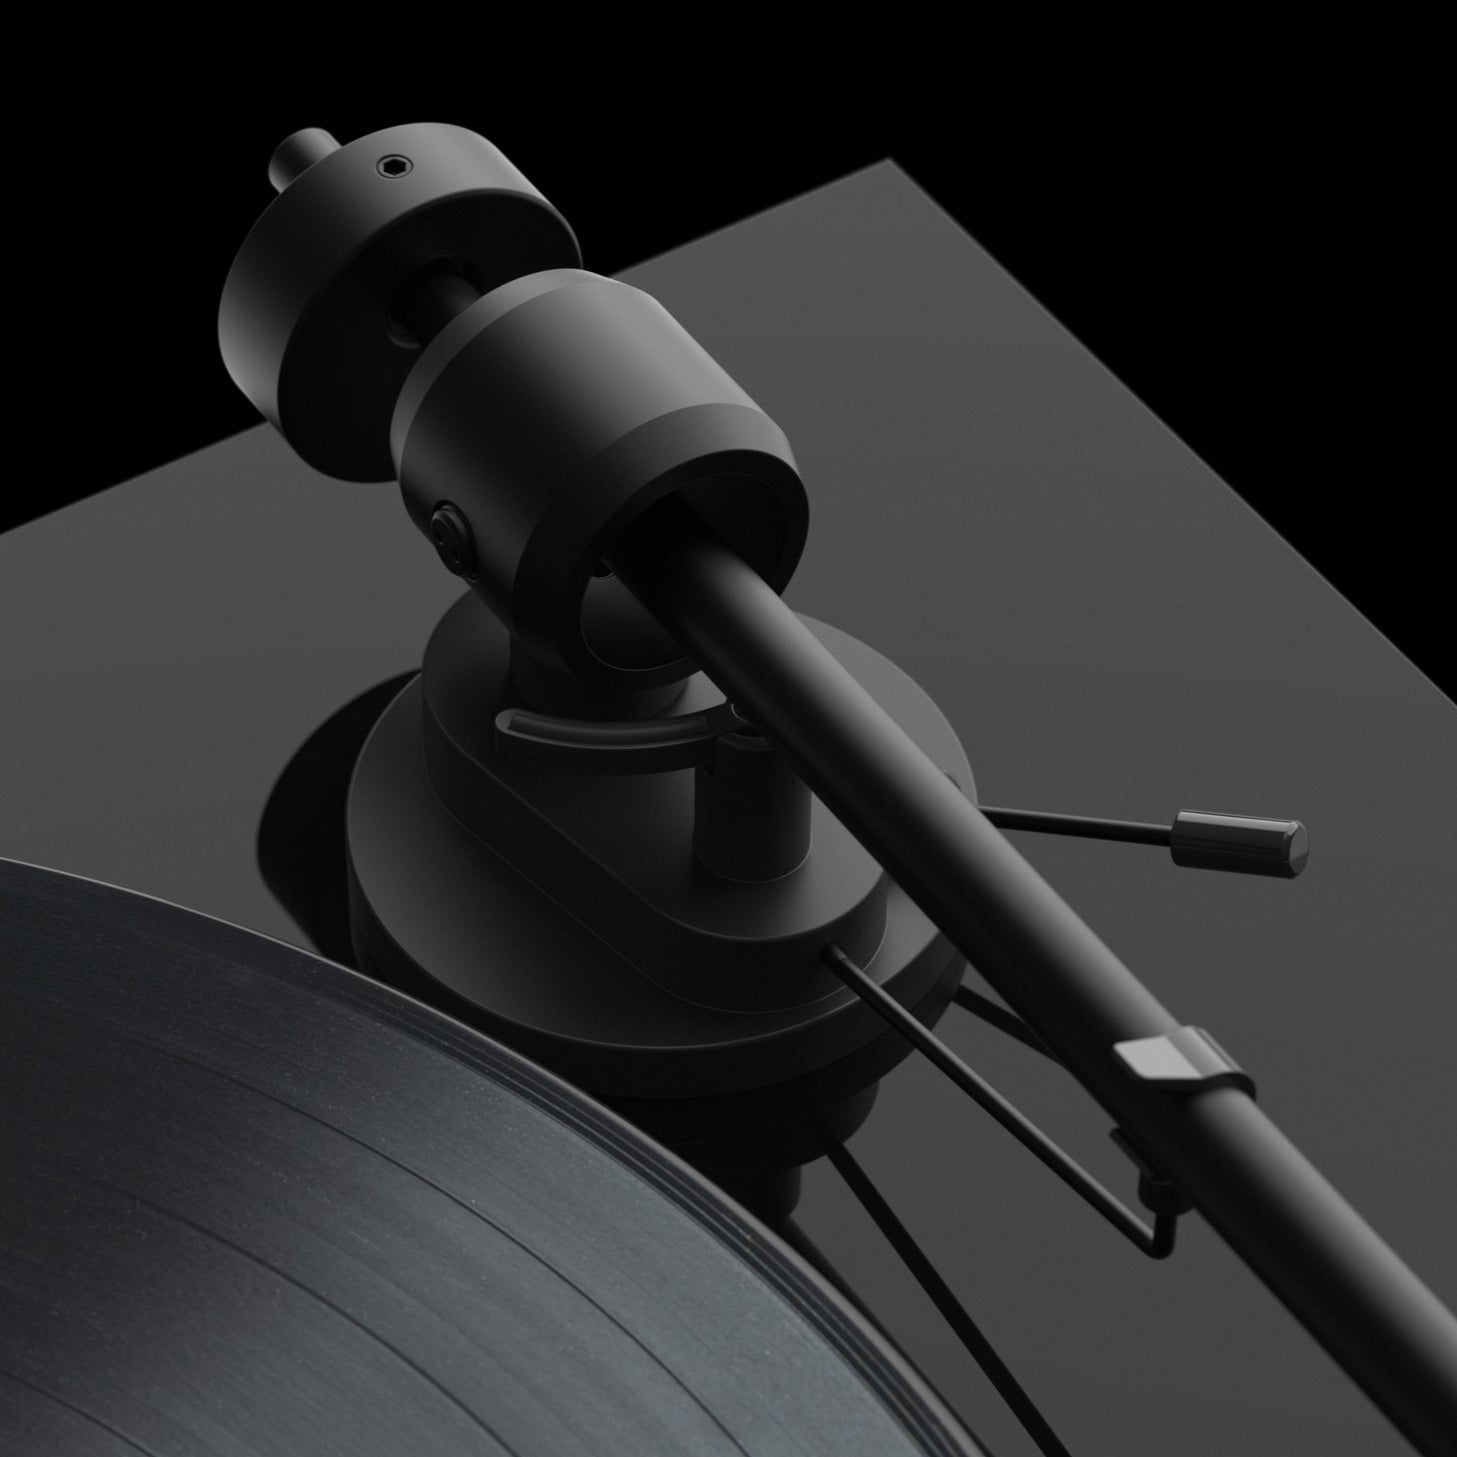 Pro-Ject E1 Turntable in Black